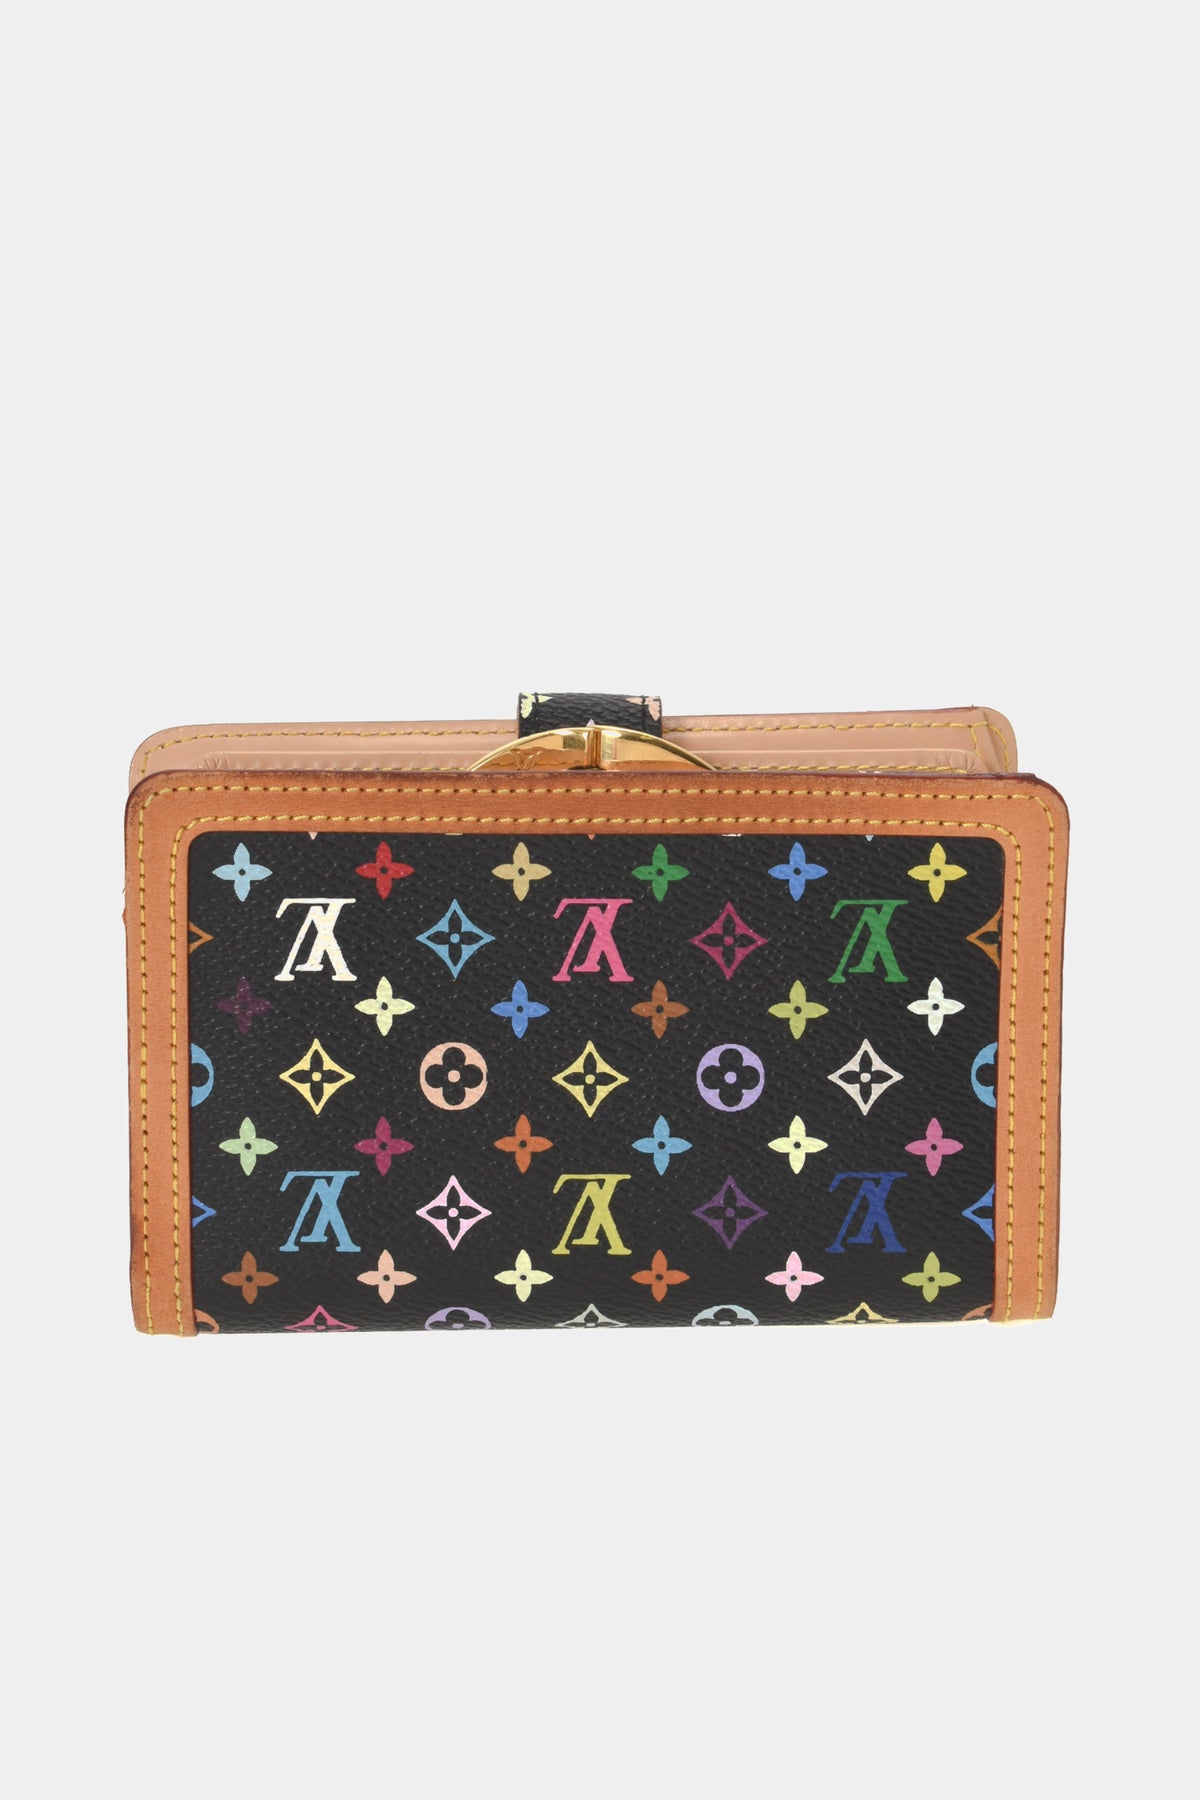 Monogram French Purse – Lord & Taylor